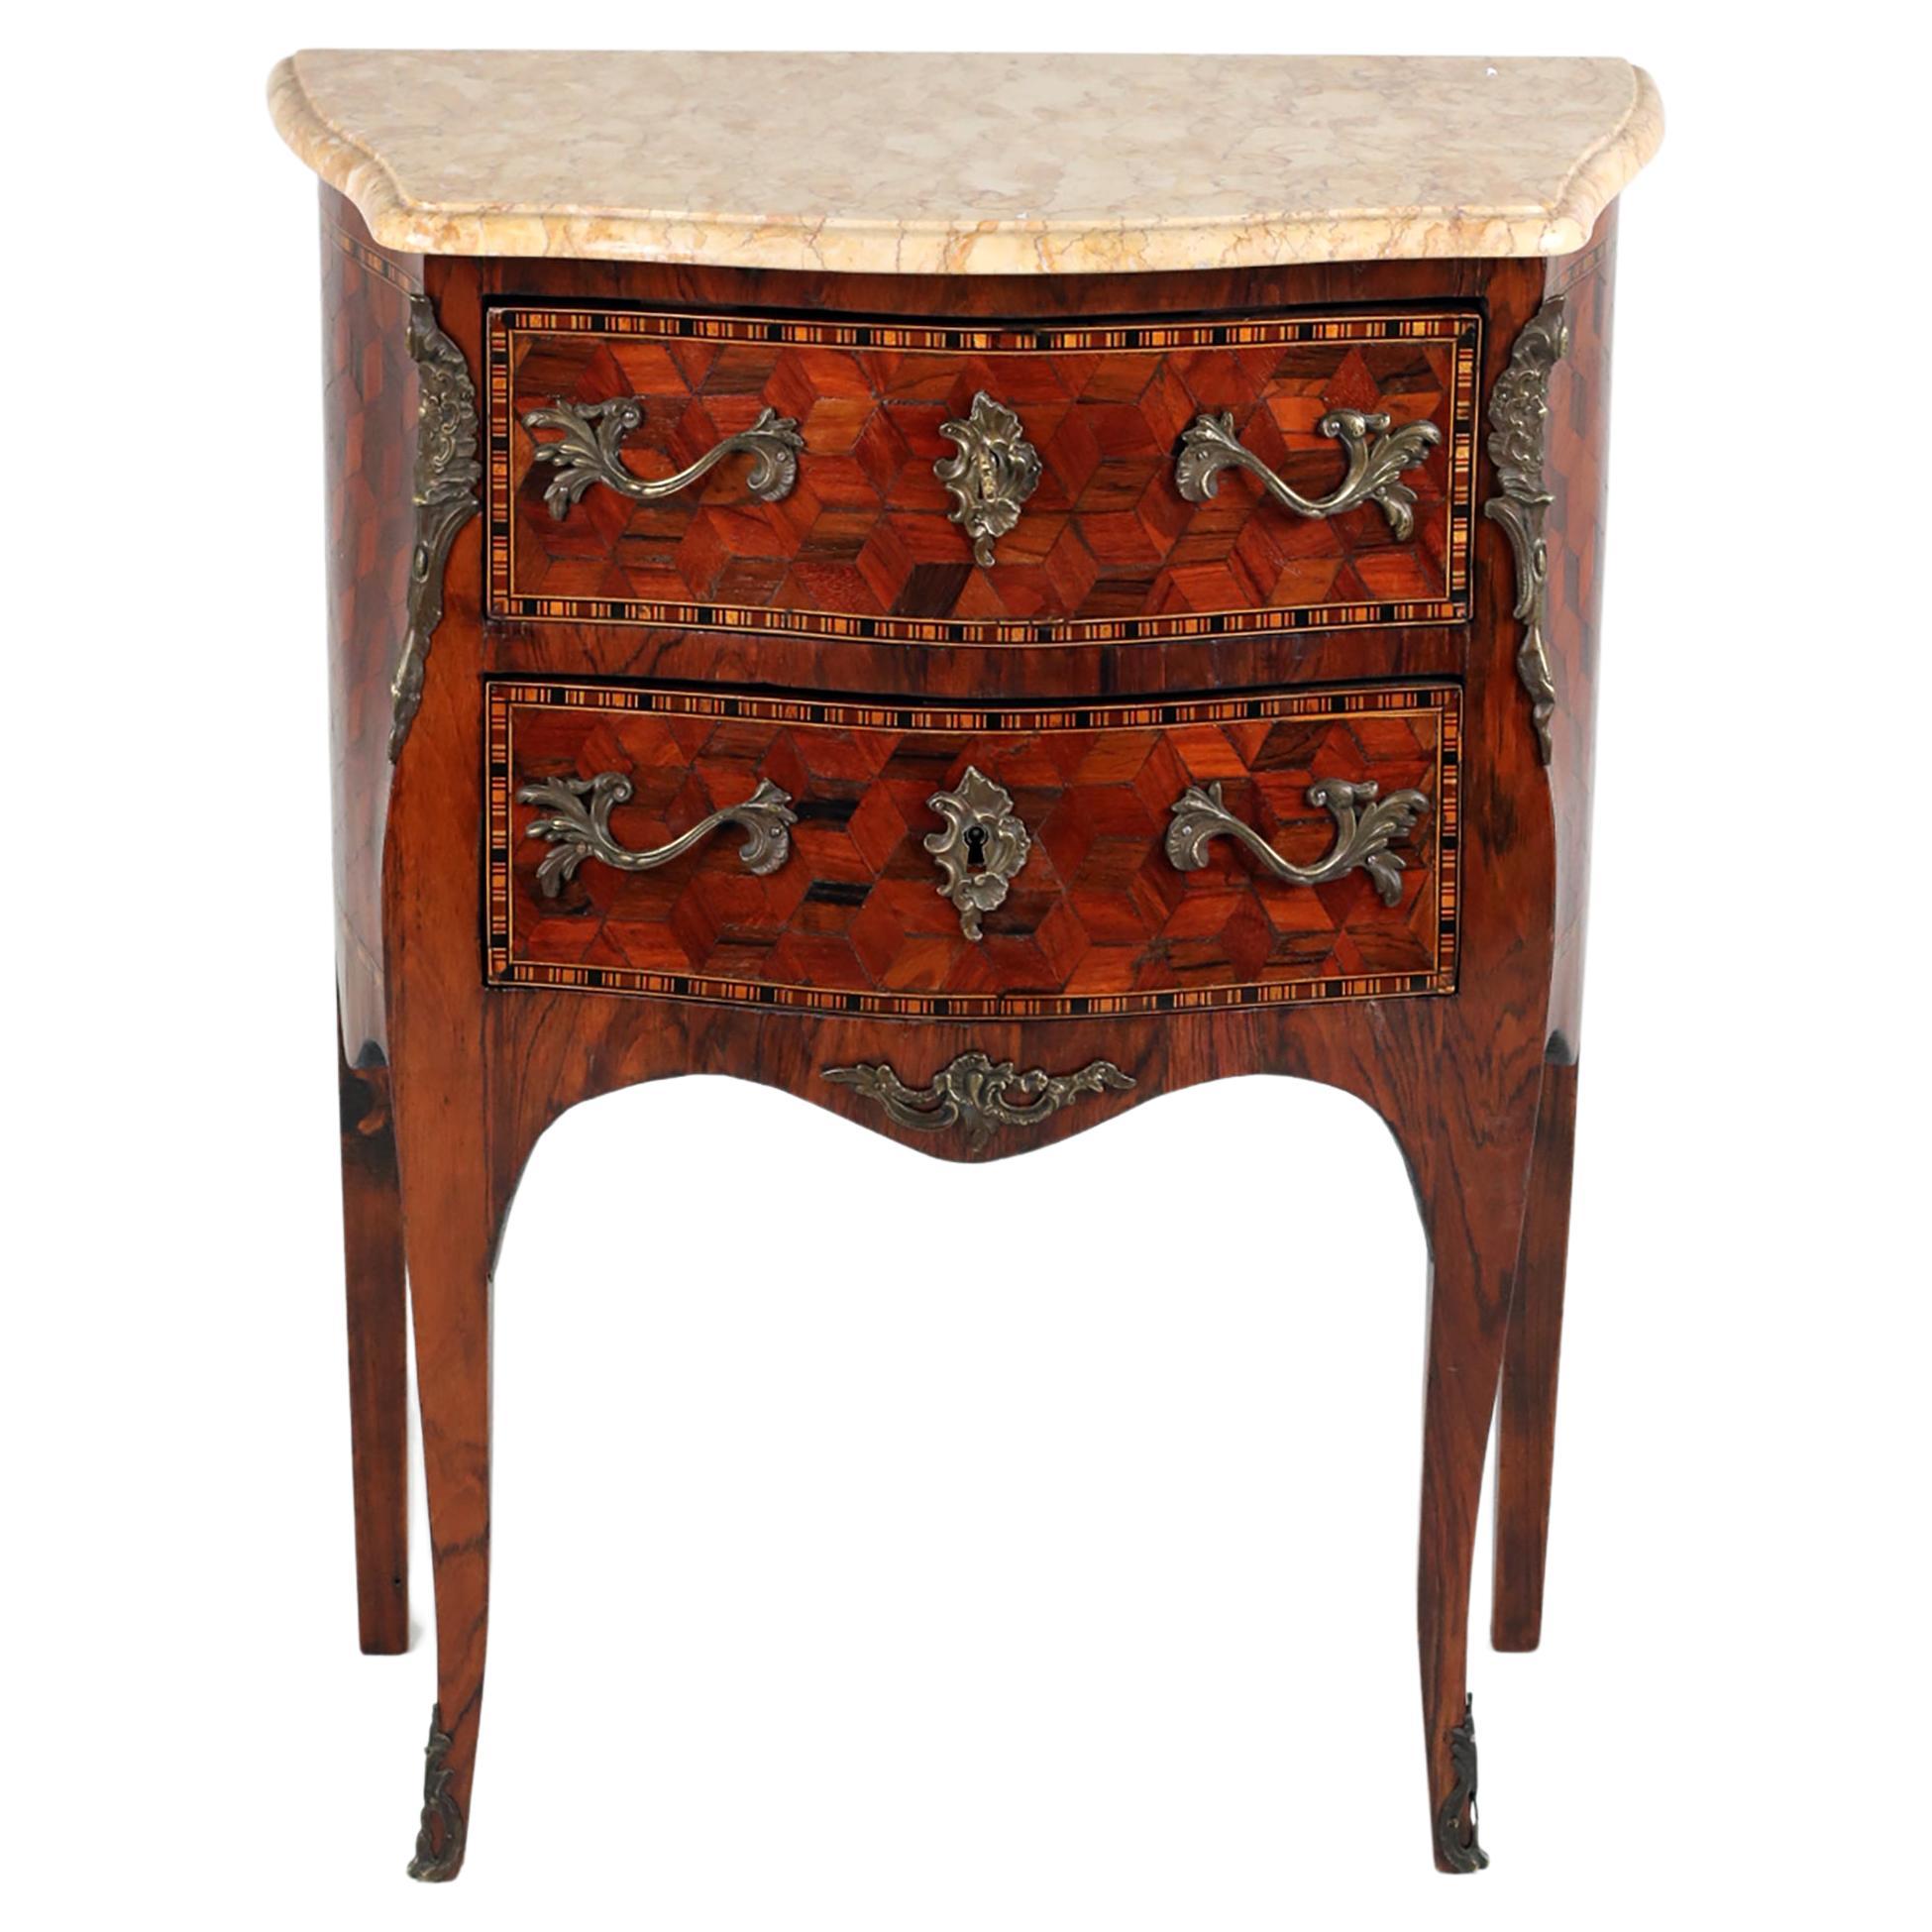 Late 19th Century French Louis XVI Style, Chest of Drawers with Parquetry